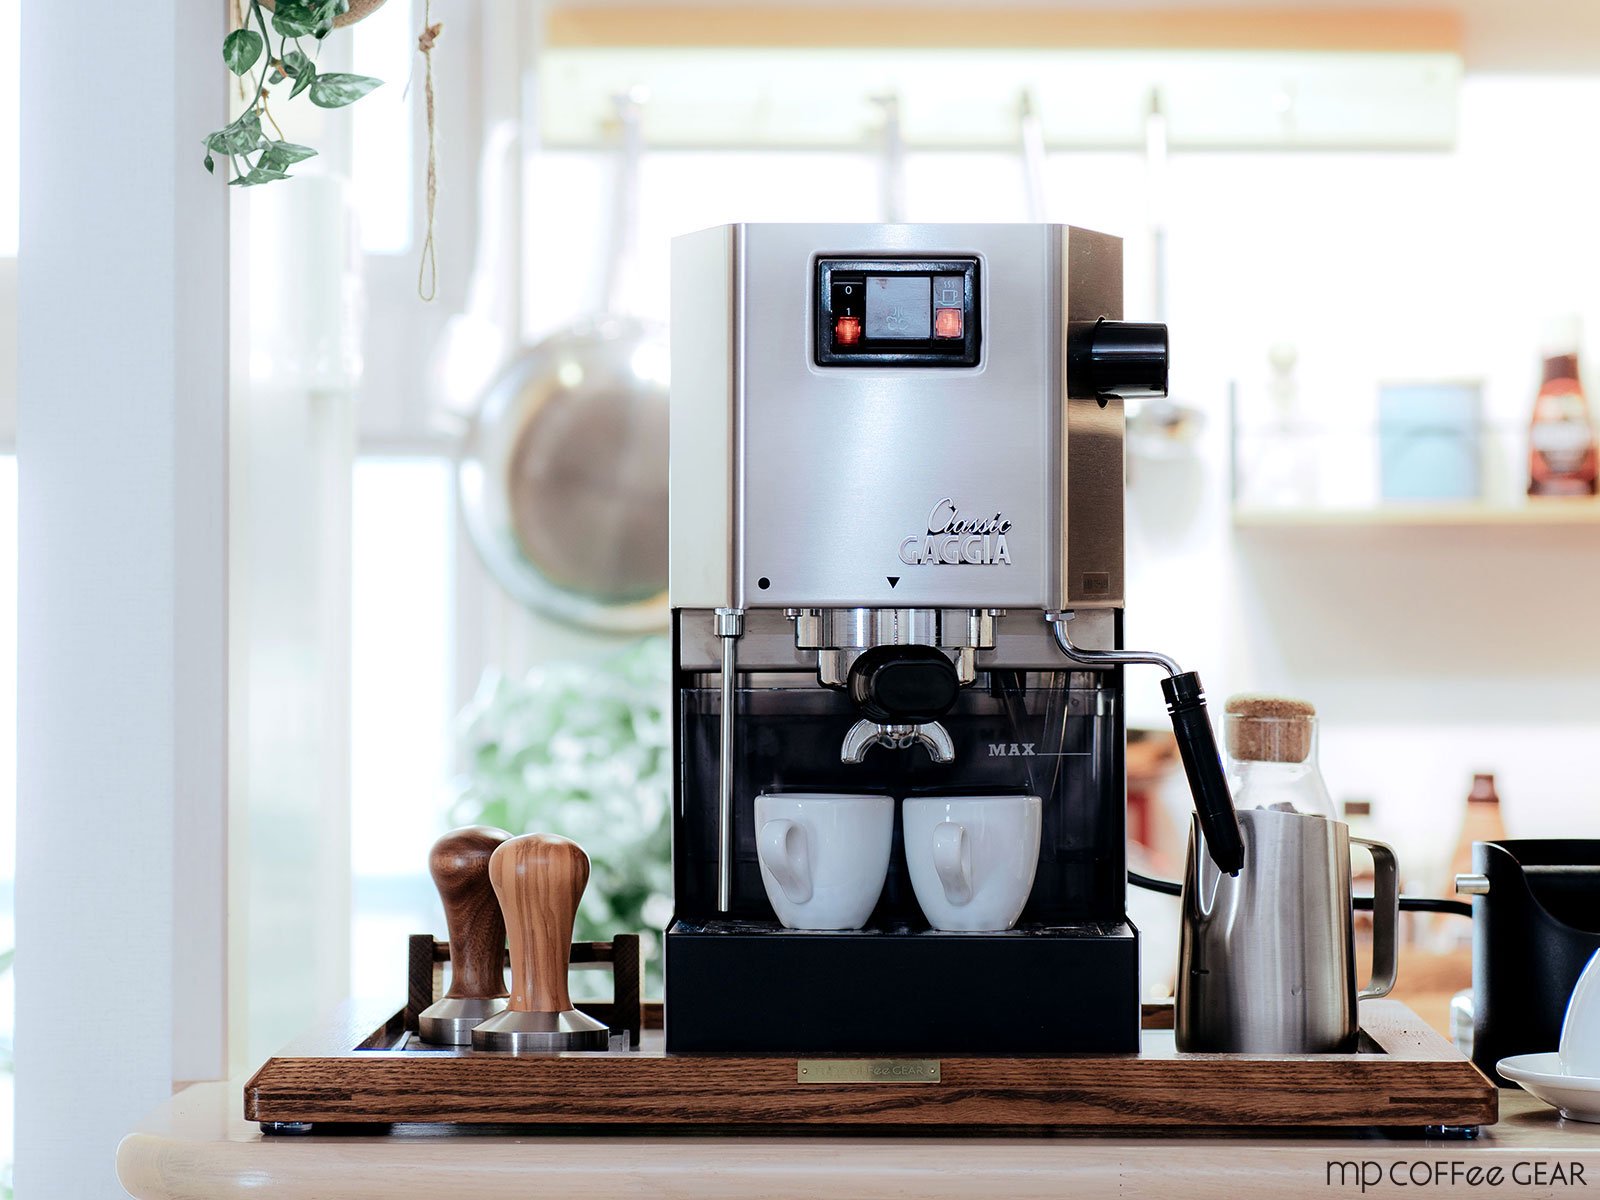 GAGGIA ガジア セミオートエスプレッソマシン Classic クラシック & WPM コーヒーグラインダー<img class='new_mark_img2' src='https://img.shop-pro.jp/img/new/icons16.gif' style='border:none;display:inline;margin:0px;padding:0px;width:auto;' />